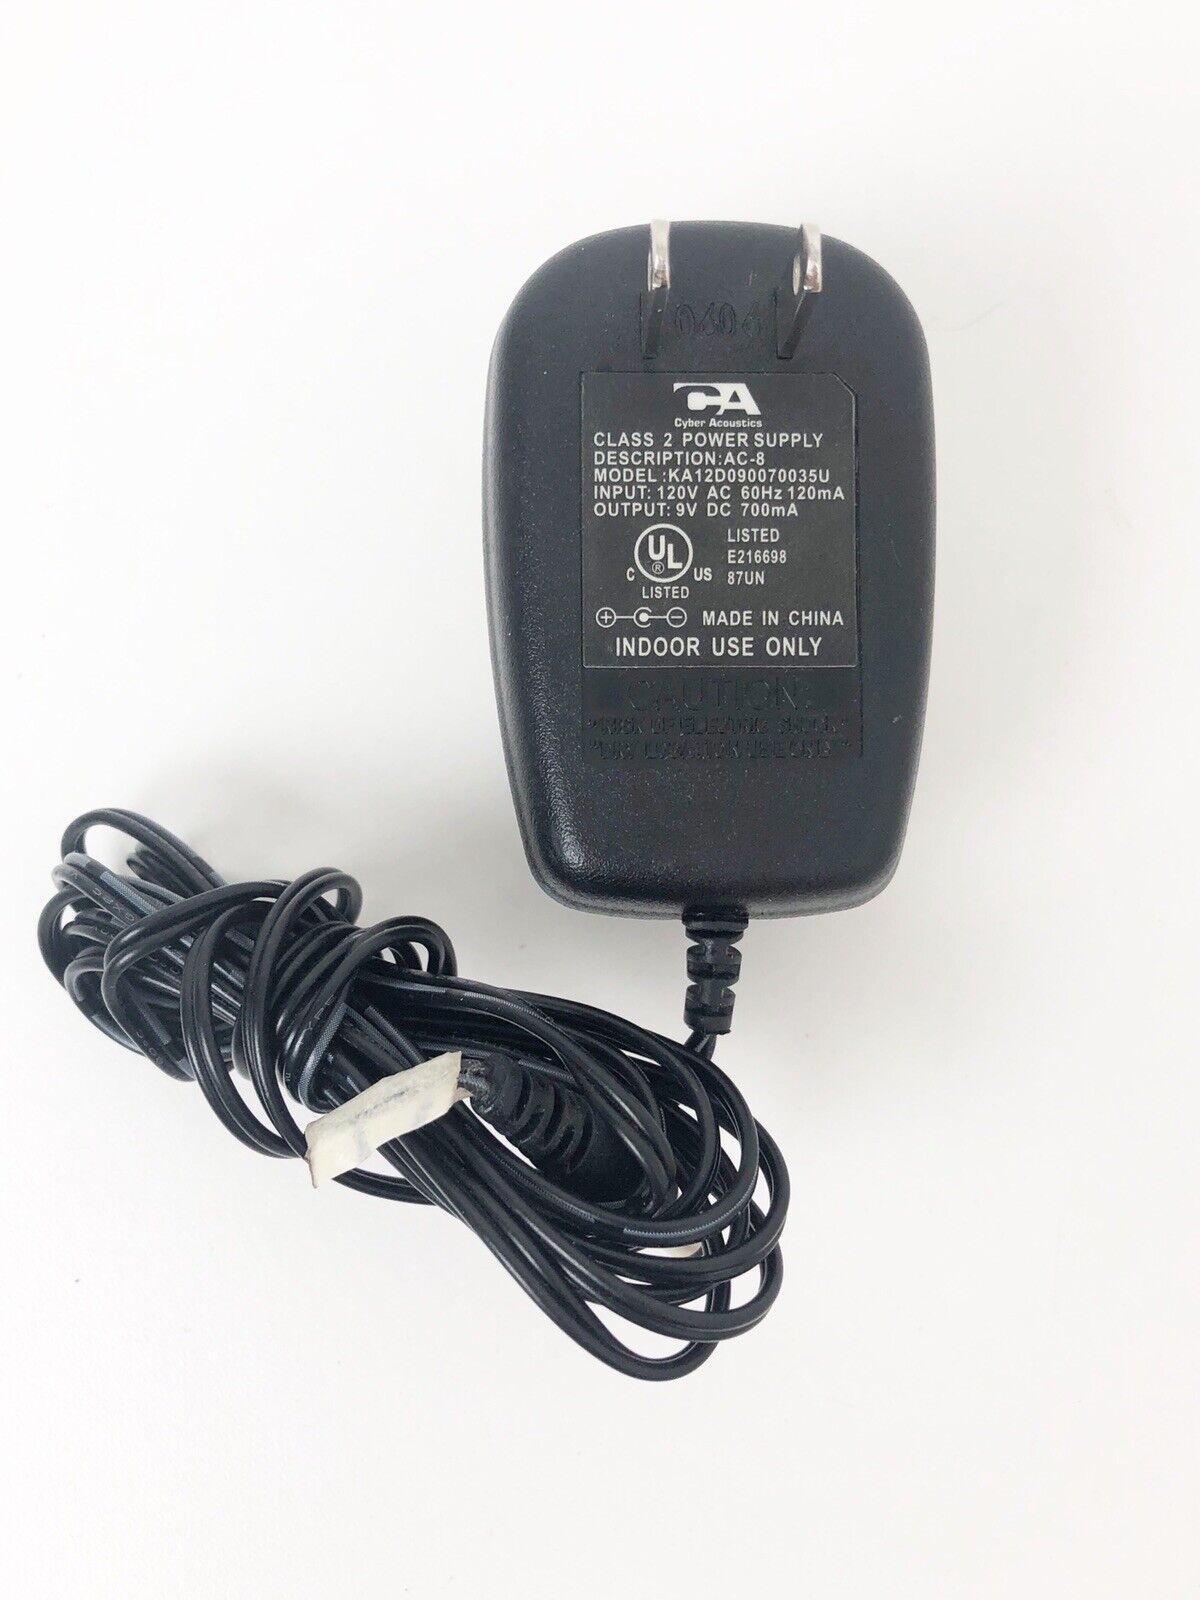 13.5V 1A AC-DC Adapter Charger for MERRY KING MK-135100 Power Supply Mains PSU Brand Unbranded/Generic Color Black Comp